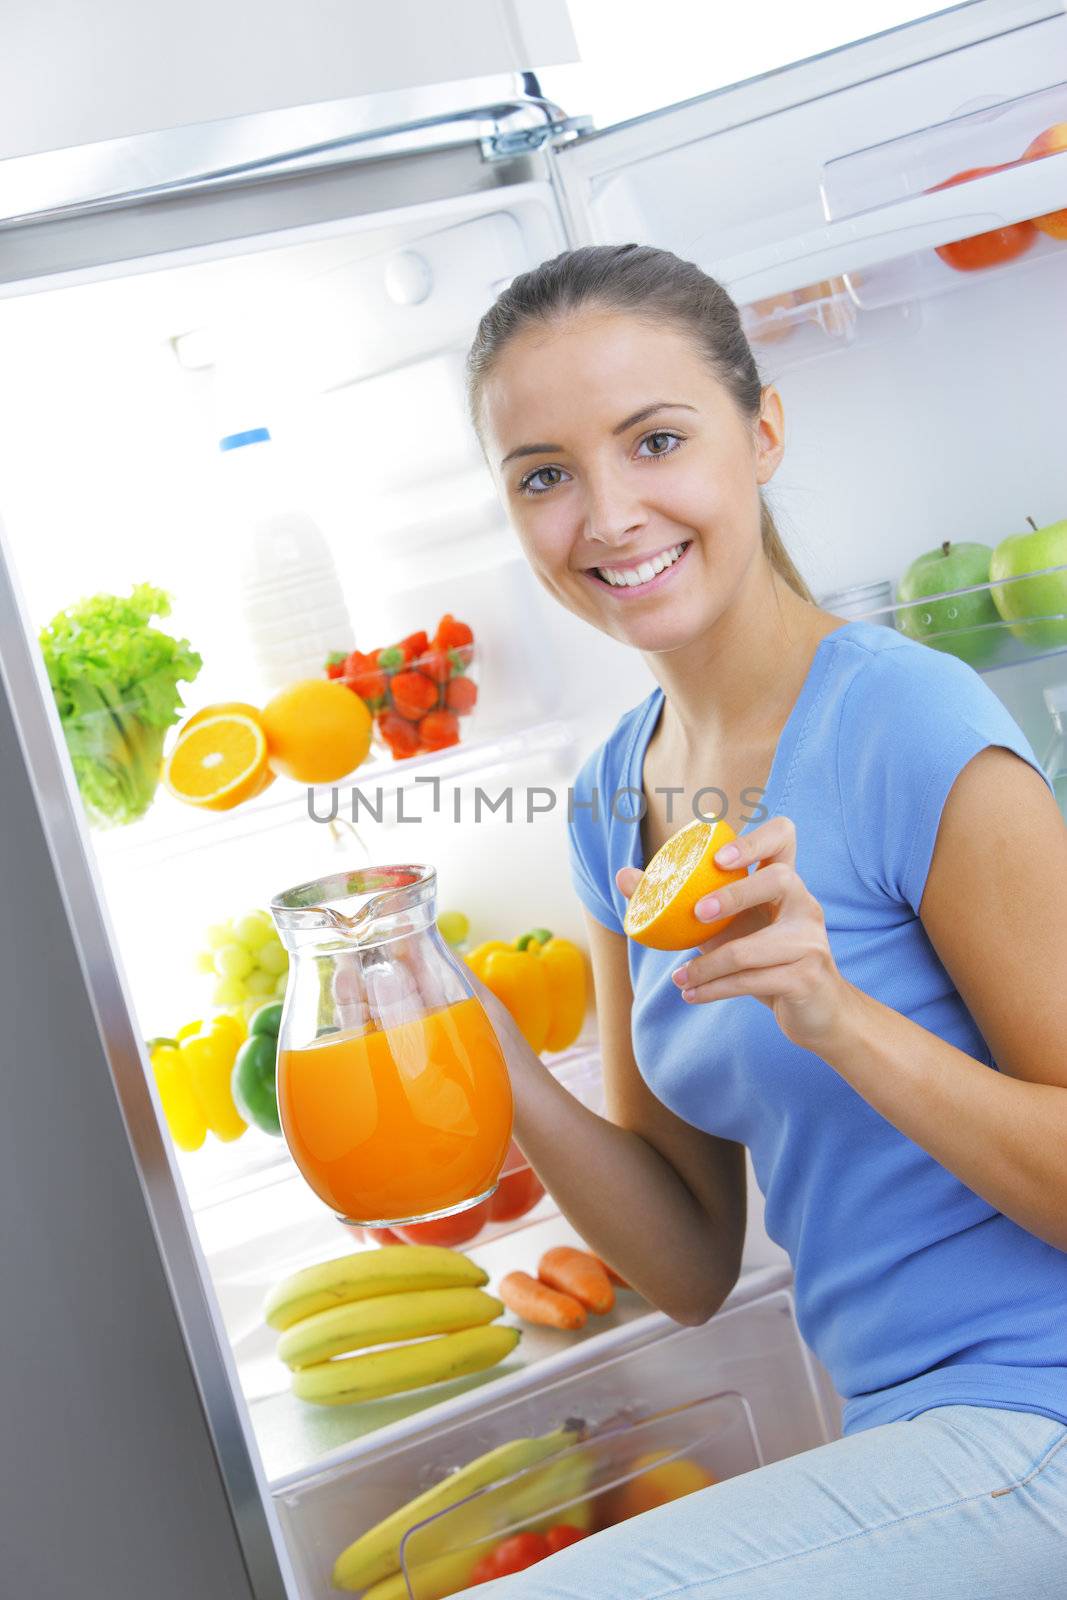 Beautiful young woman near refrigerator with a carafe of orange juice